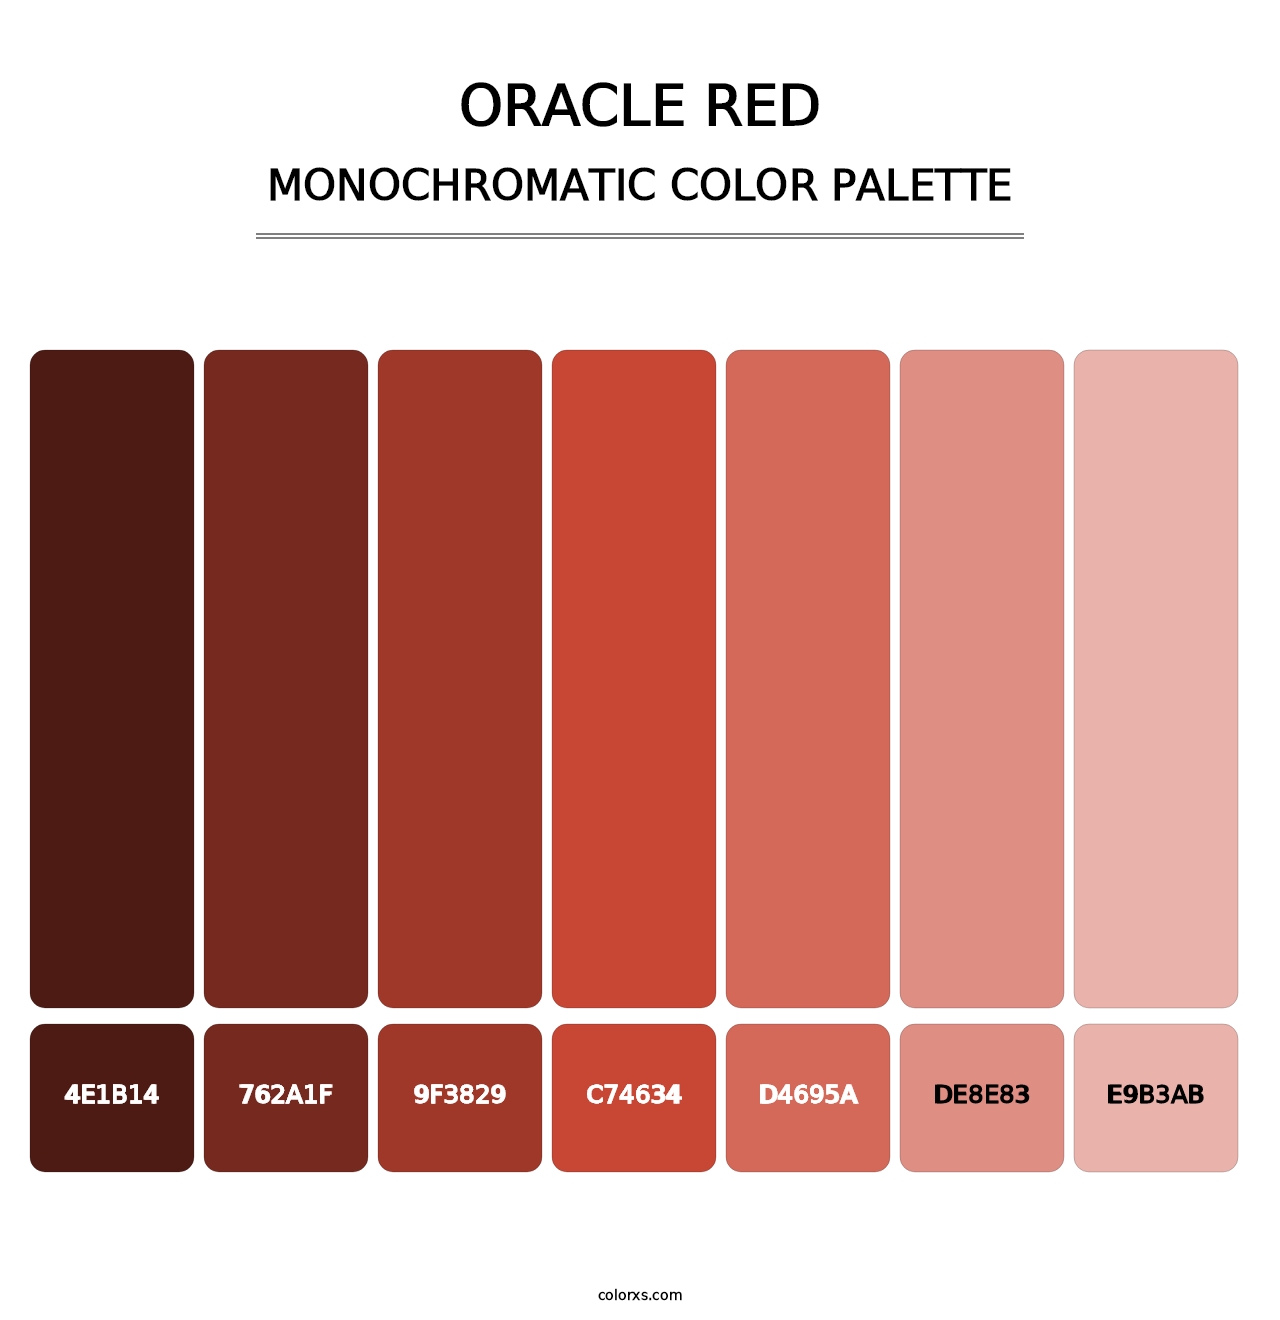 Oracle Red - Monochromatic Color Palette